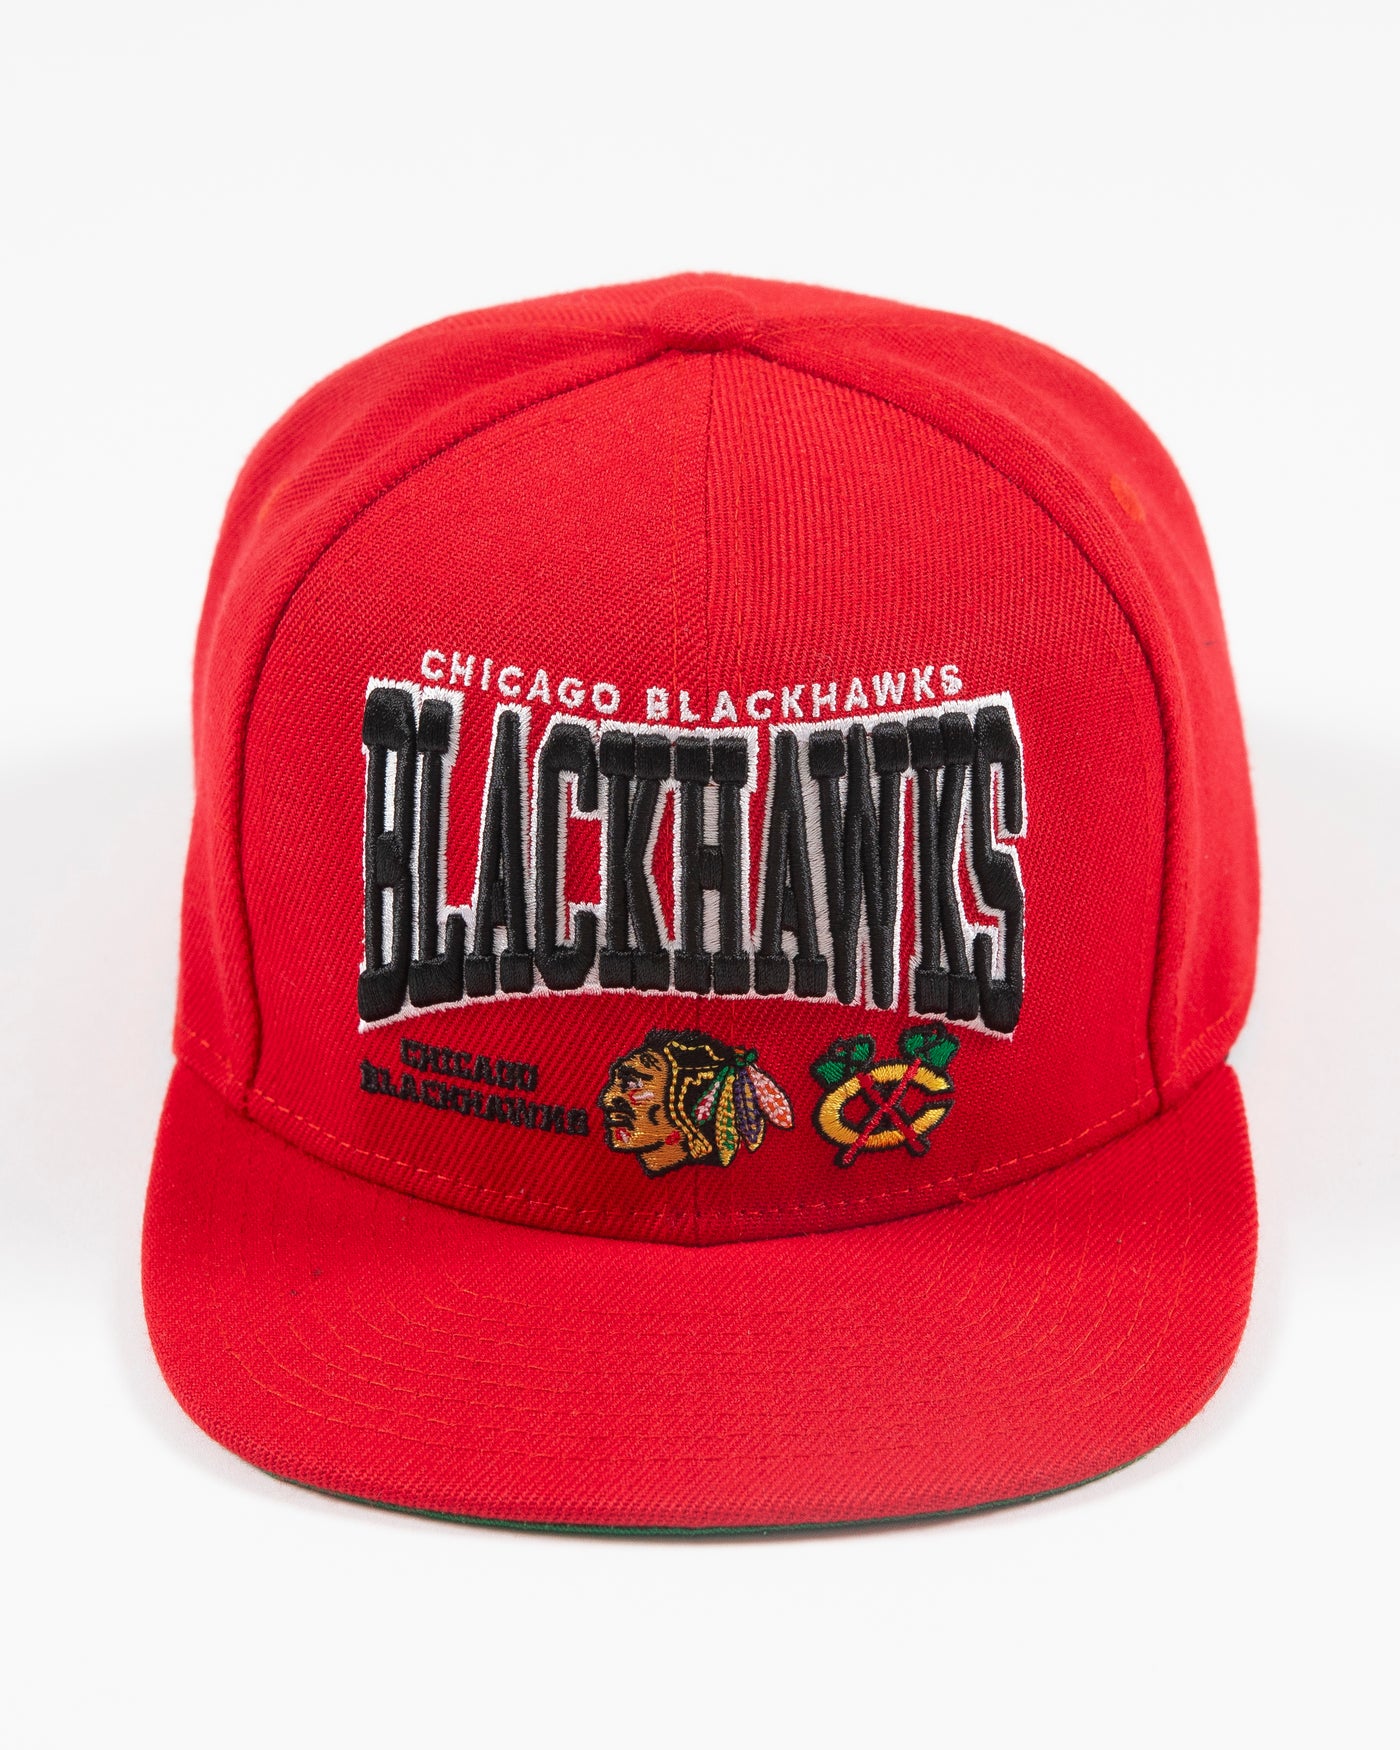 red Mitchell & Ness youth snapback with Chicago Blackhawks wordmark graphic and primary and secondary logos embroidered on front - front lay flat